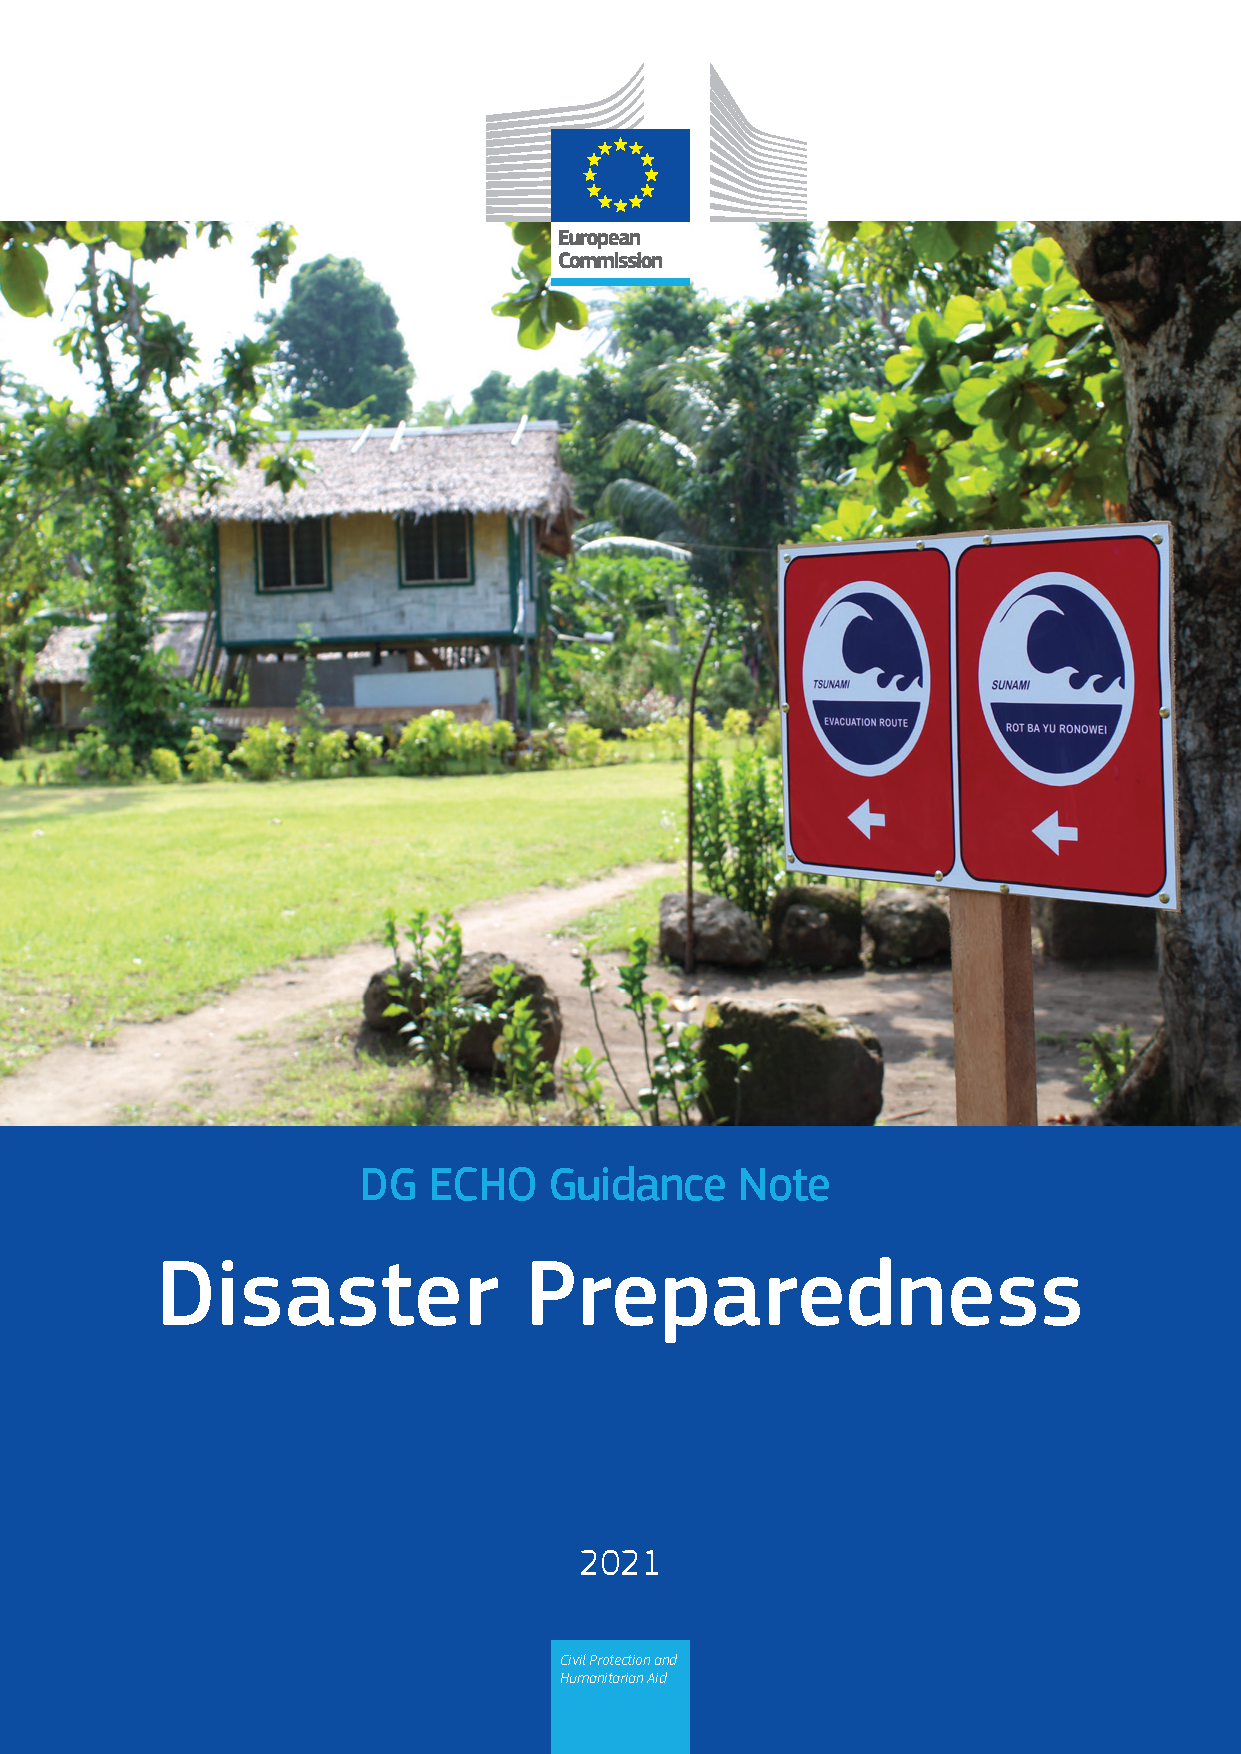 Cover page for Disaster Preparedness Guidance Note